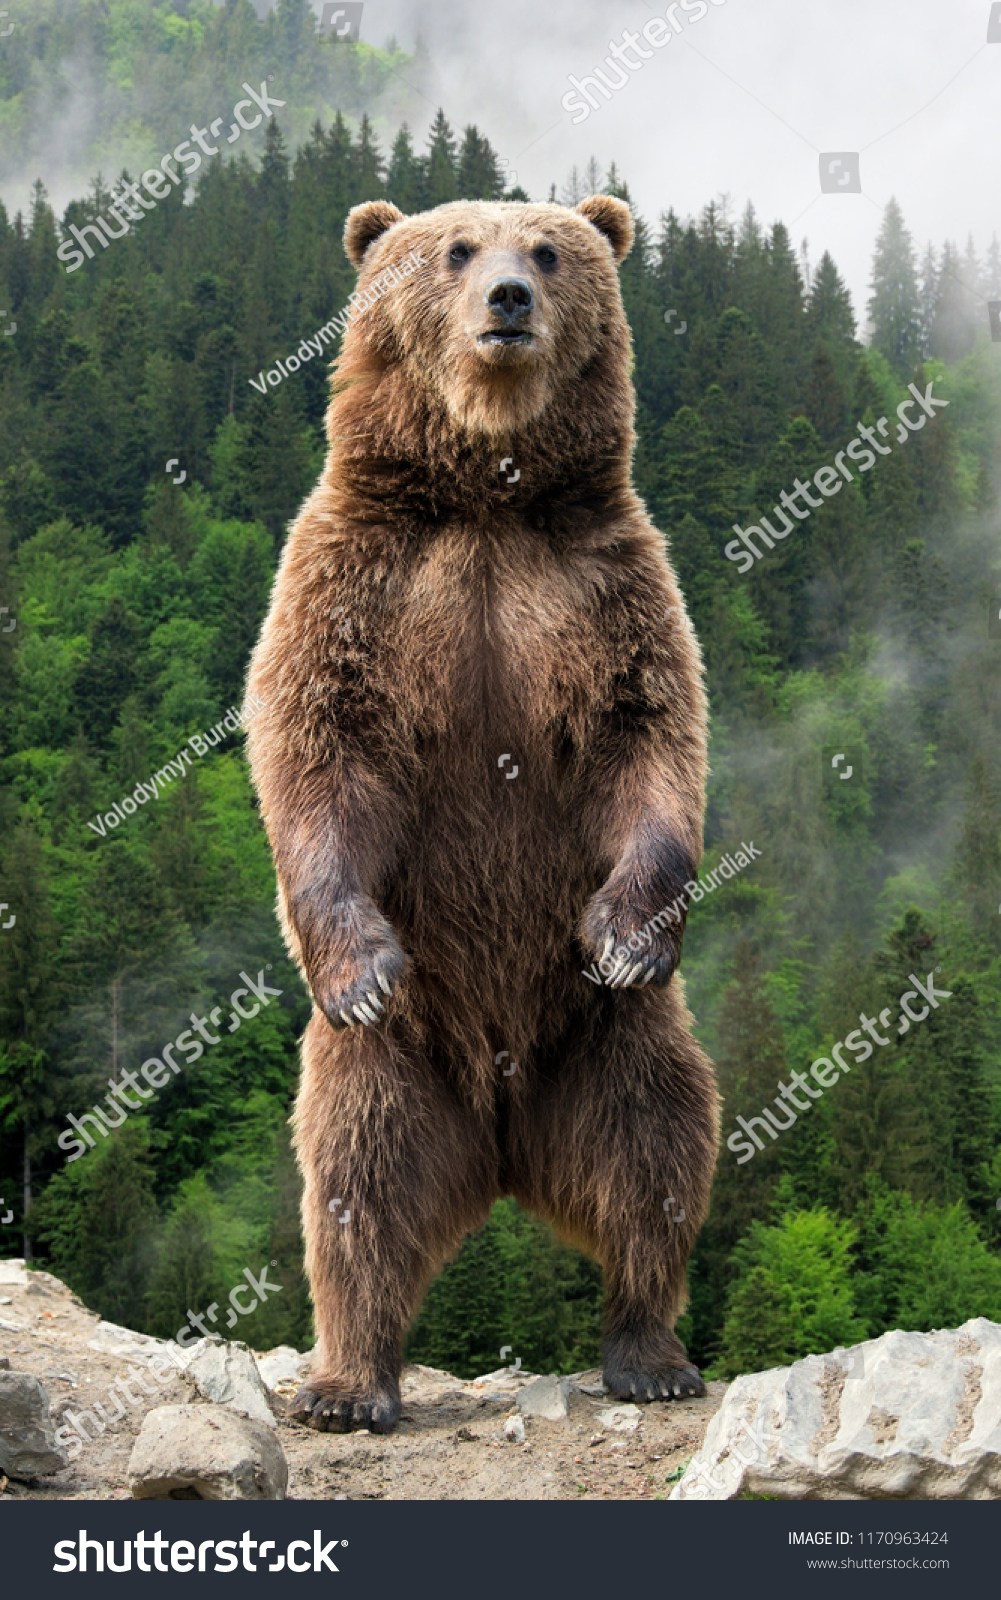 Brown bear (Ursus arctos) standing on his hind legs in the spring forest #1170963424